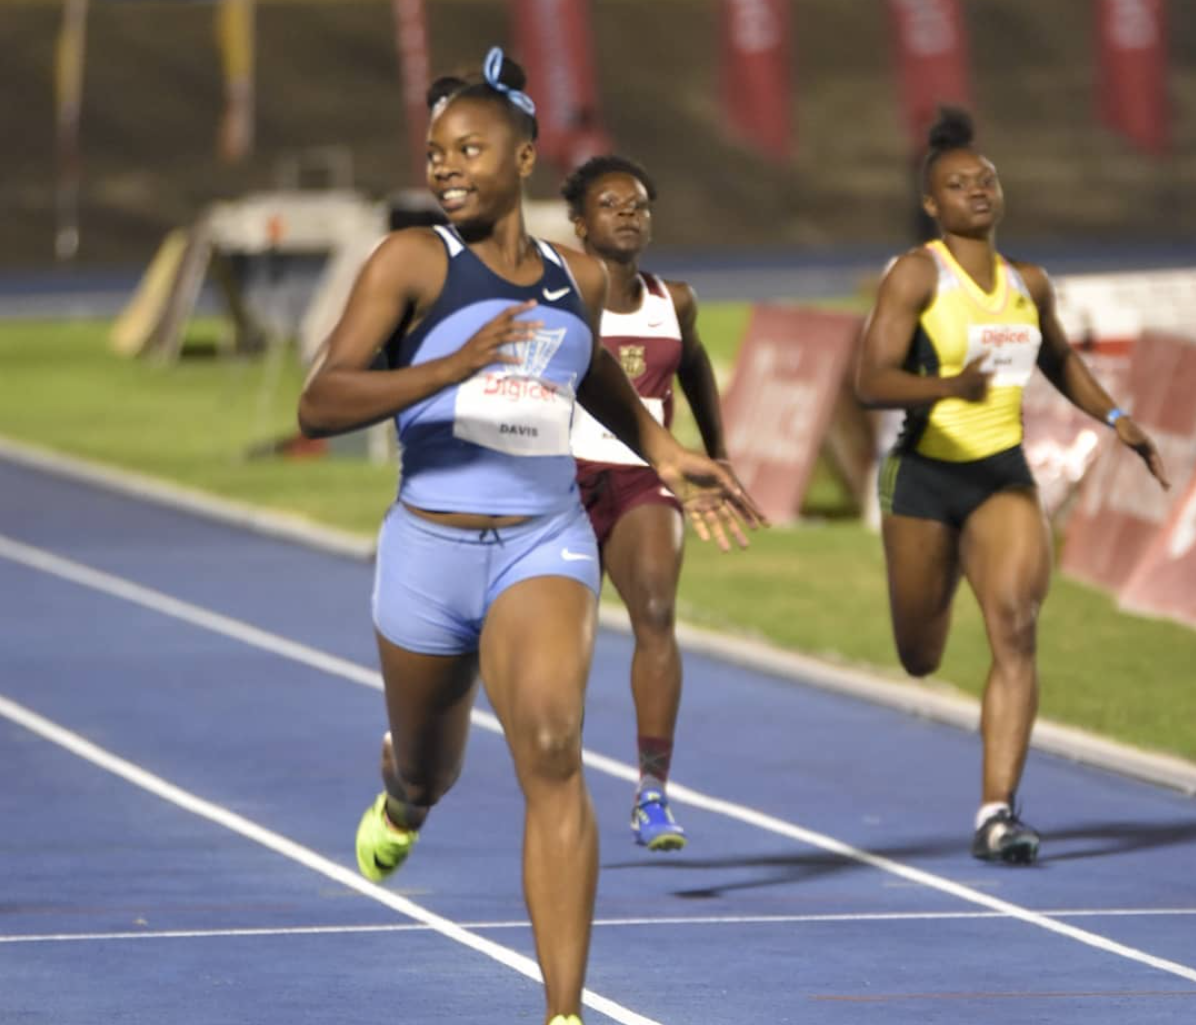 Kevona Davis satisfies coach with 100m opener at Ben Francis Invitational